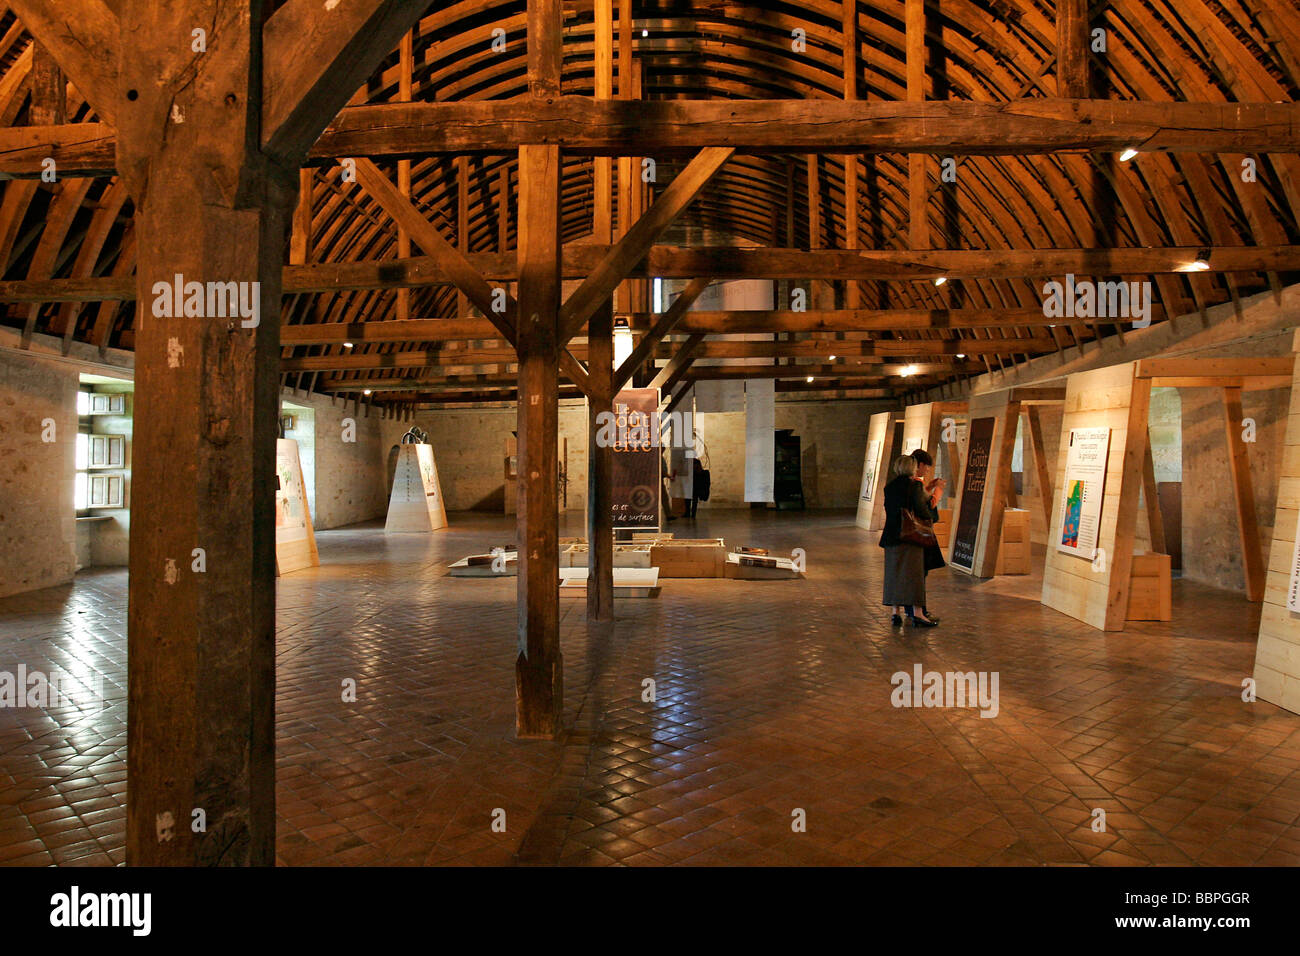 THE LAYMEN'S DORMITORY, EXHIBITION HALL, INTERIOR, NOIRLAC ABBEY, CHER (18), FRANCE Stock Photo